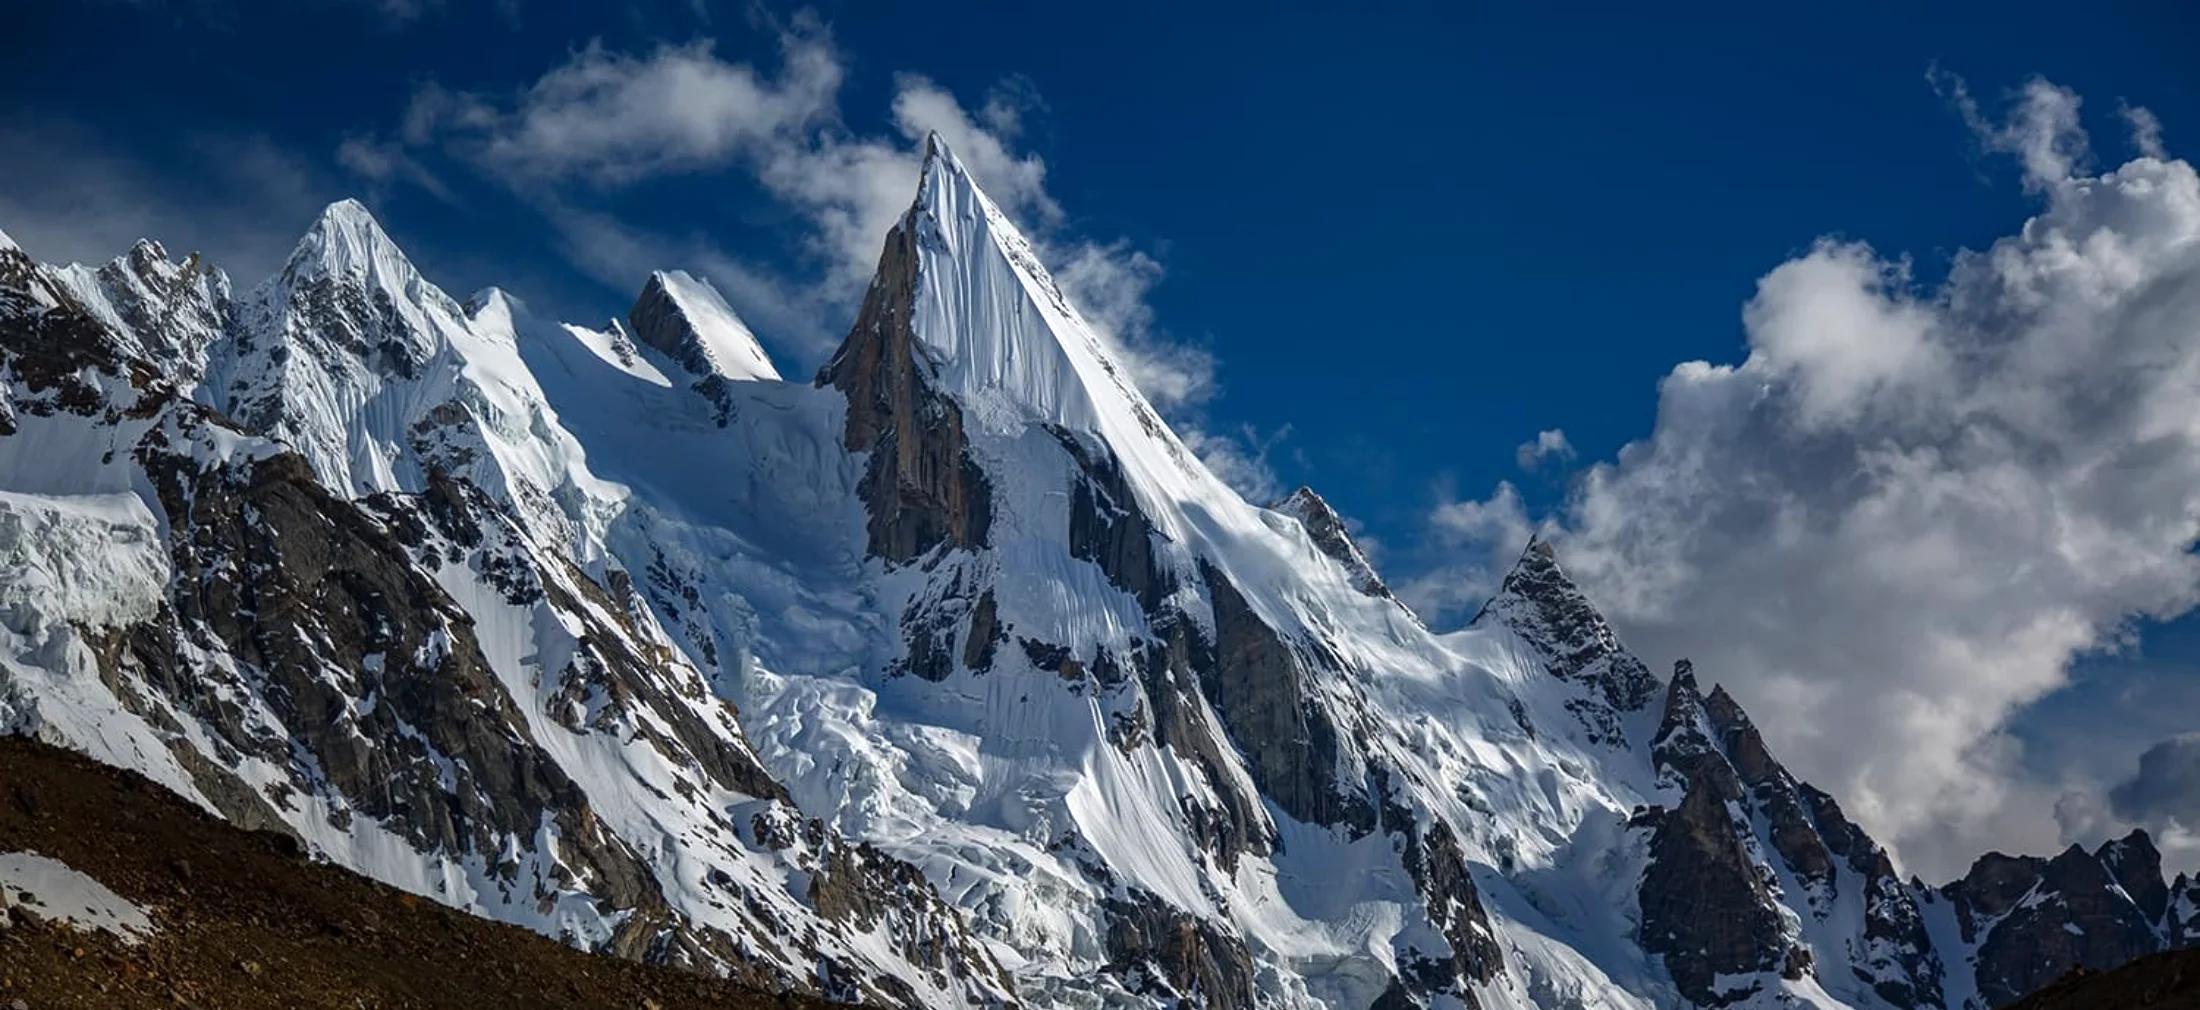 K2 & Ghondogoro La Trek - Local guideEmbark on an epic adventure to conquer the Five 8000m Base Camps with expert local guides. Experience the power of nature and the thrill of achievement!K2 & Ghondogoro la trek, Ghondogora, K2, K2 ghondoro la